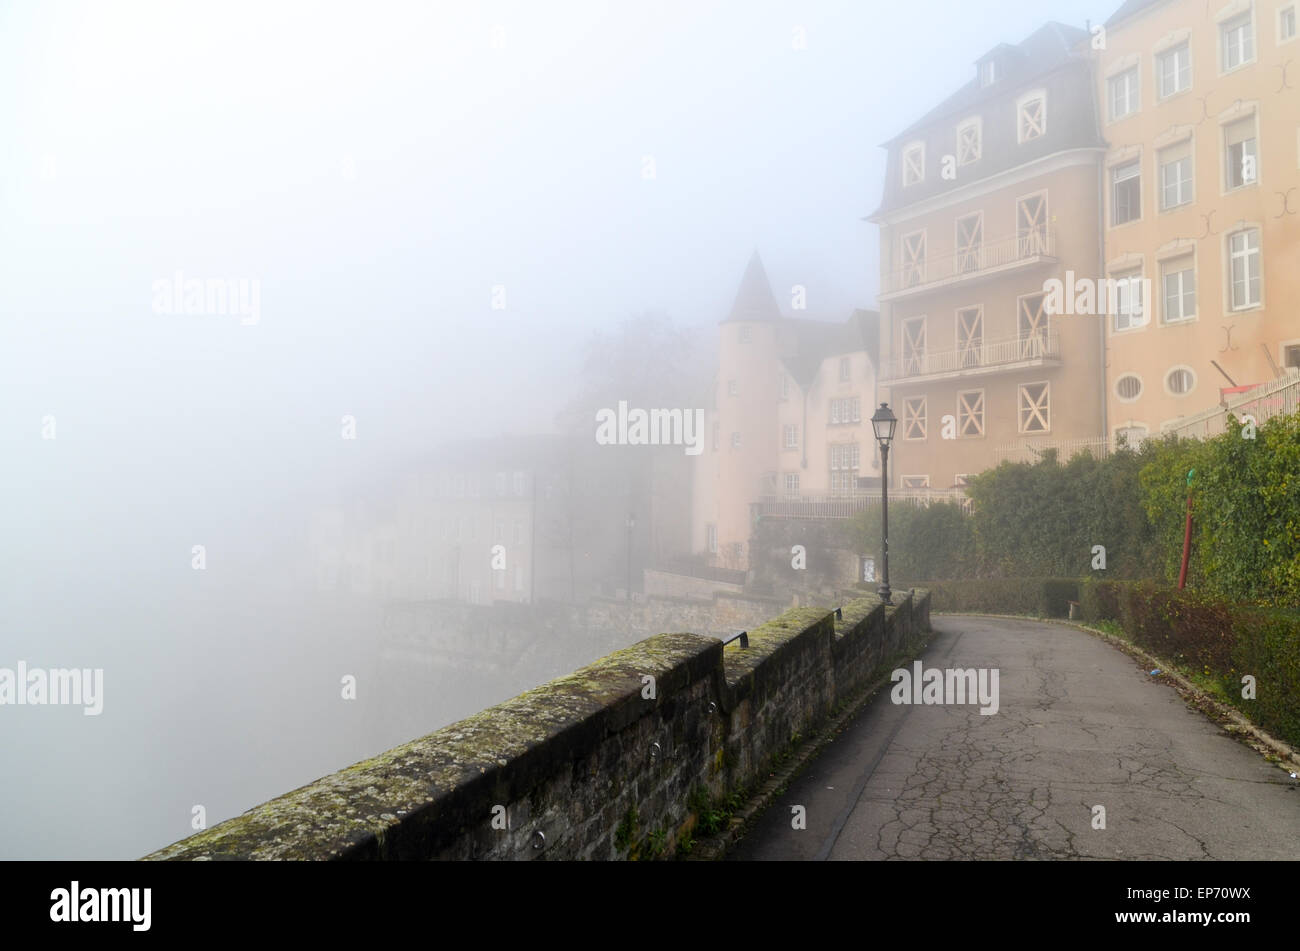 Old city centre of Luxembourg City in the foggy and misty morning Stock Photo